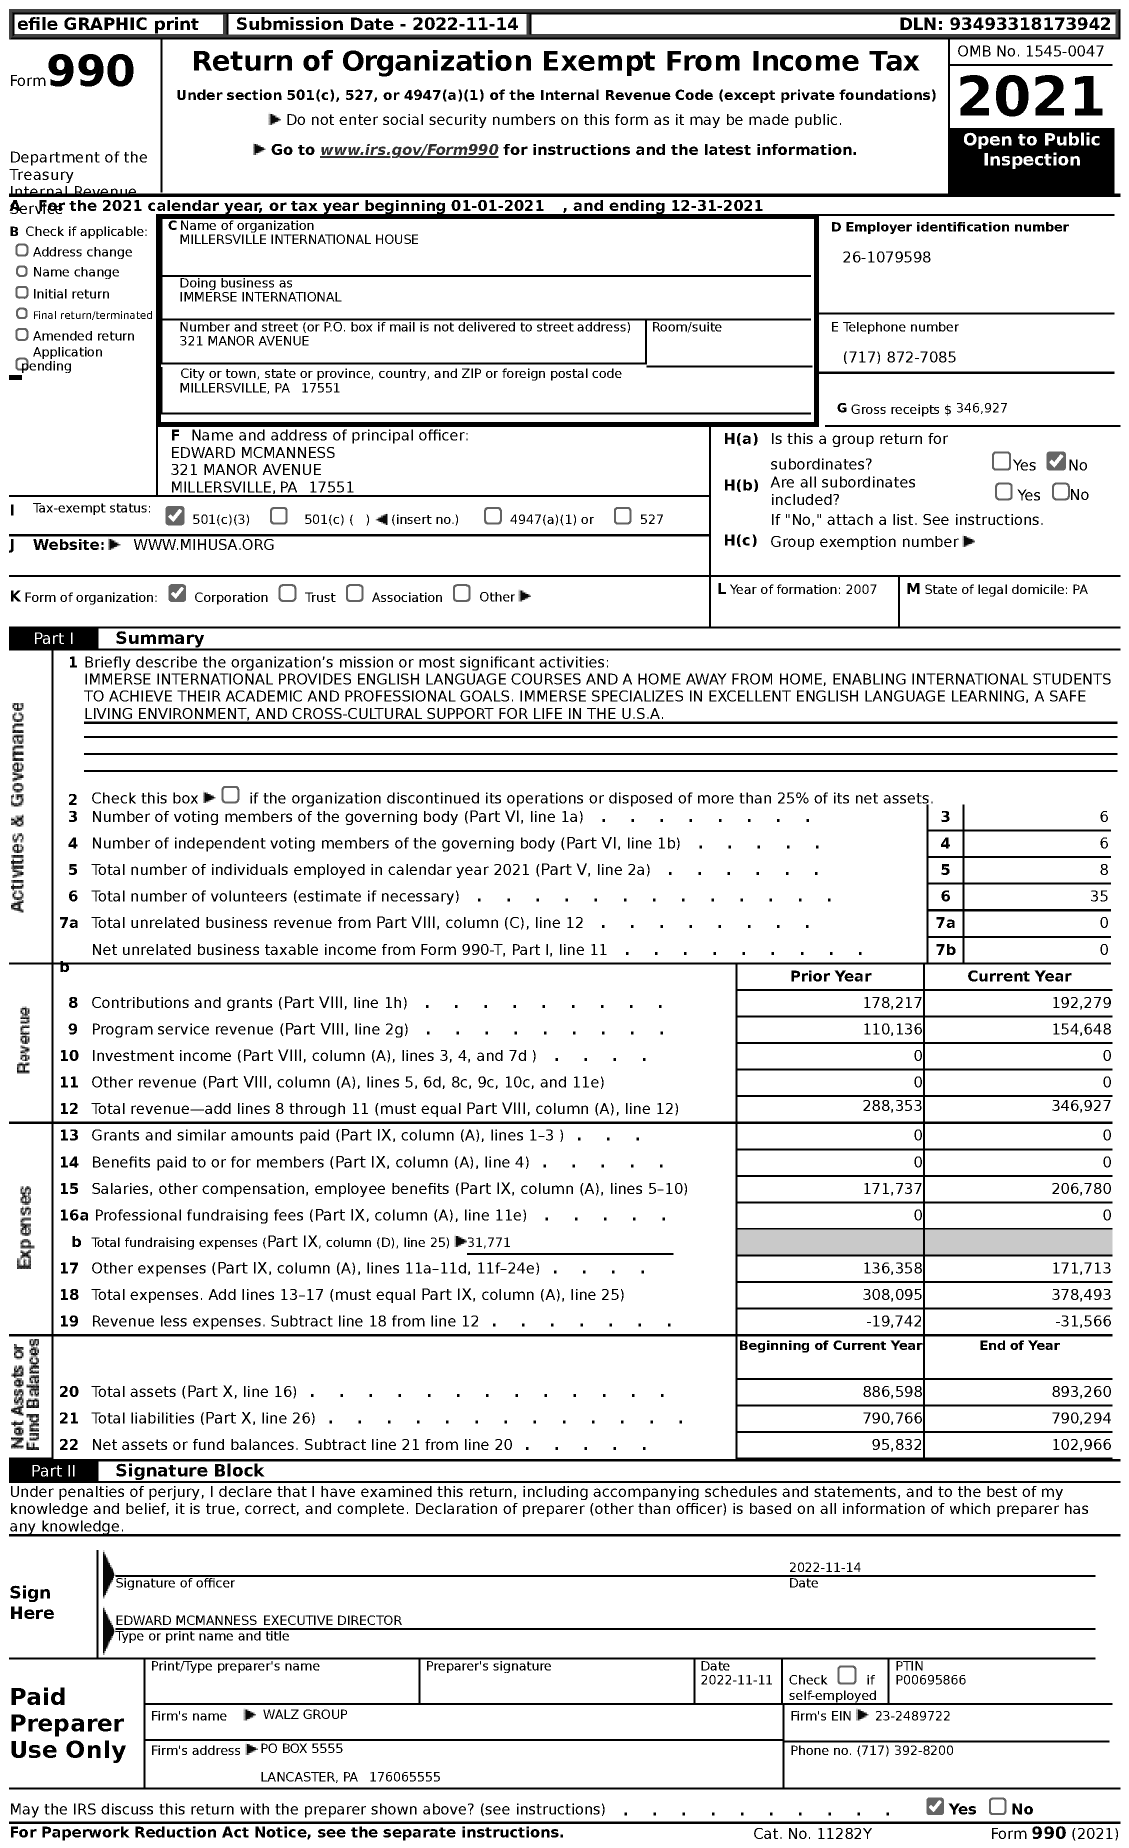 Image of first page of 2021 Form 990 for Immerse International